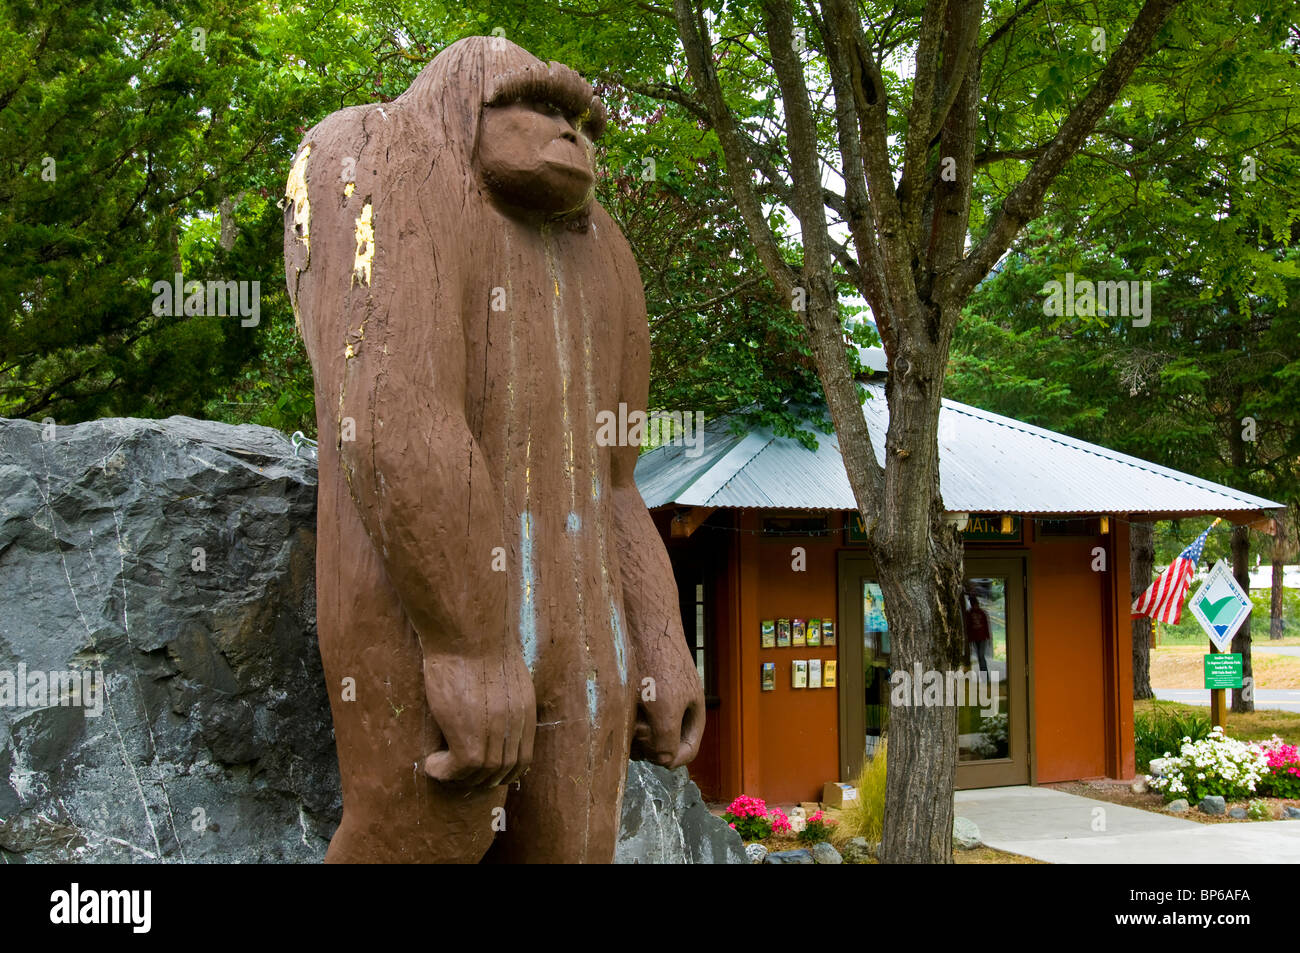 Statue of Bigfoot outside the local visitor information center in Willow Creek, California Stock Photo